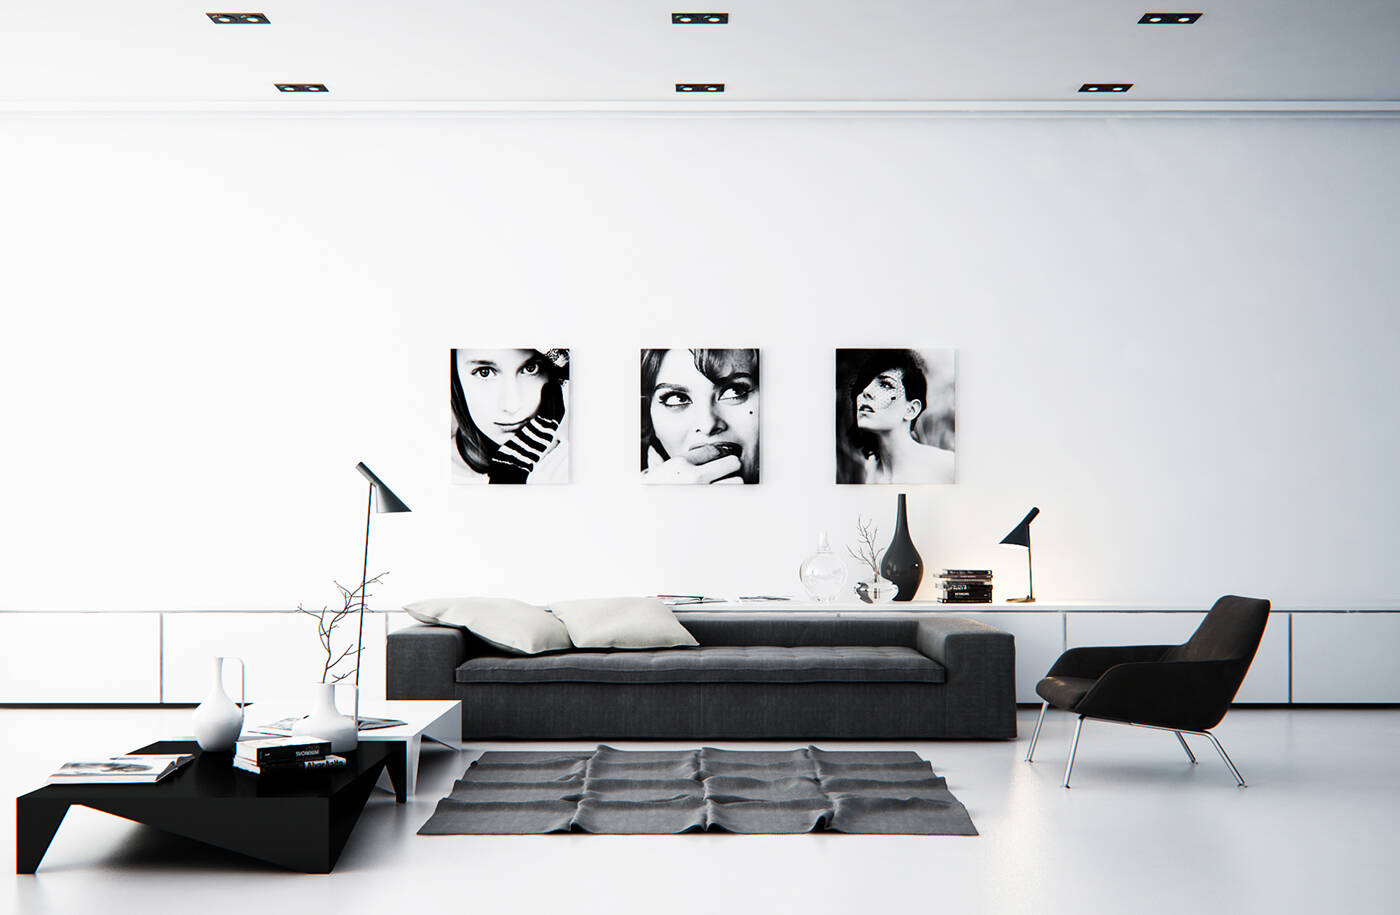 The black and white artworks perfectly fit in the contemporary space